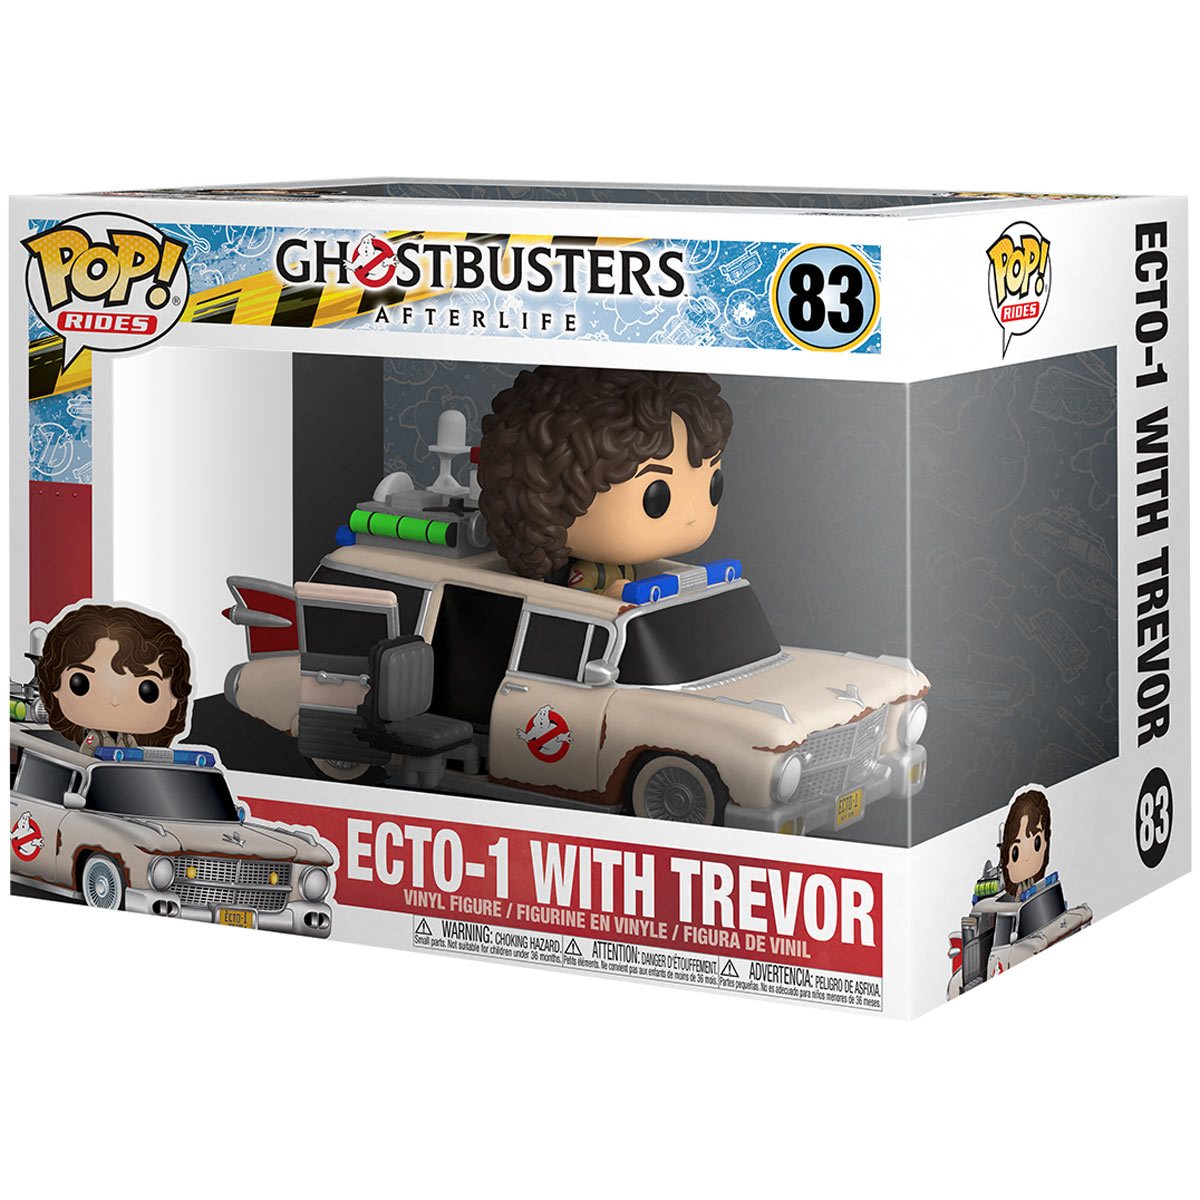 POP! Ghostbuster 3: Afterlife - Ecto-1